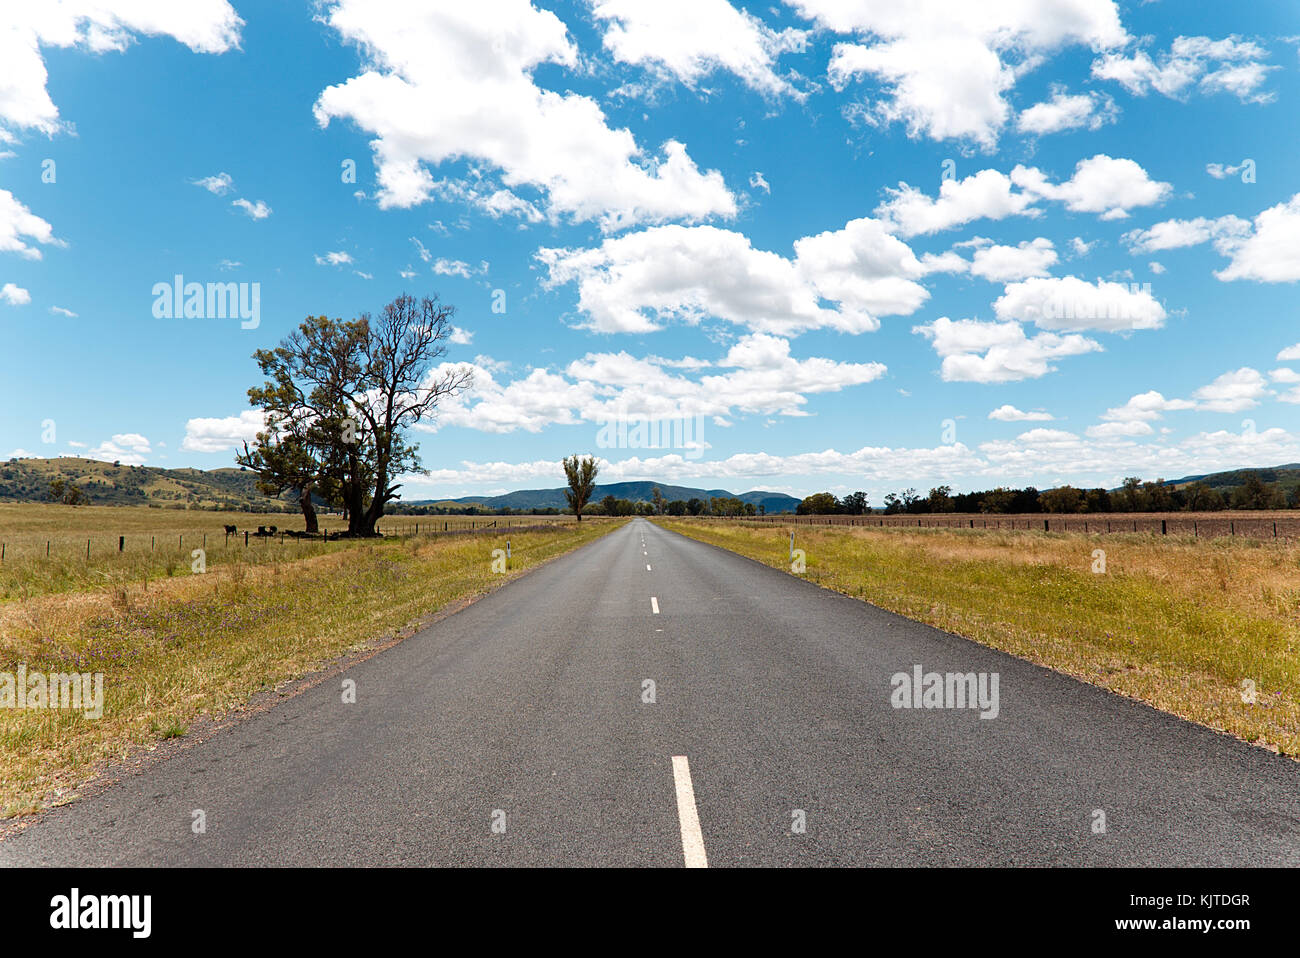 Sealed regional highway through agricultural lands - cattle - Northern New South Wales Australia Stock Photo